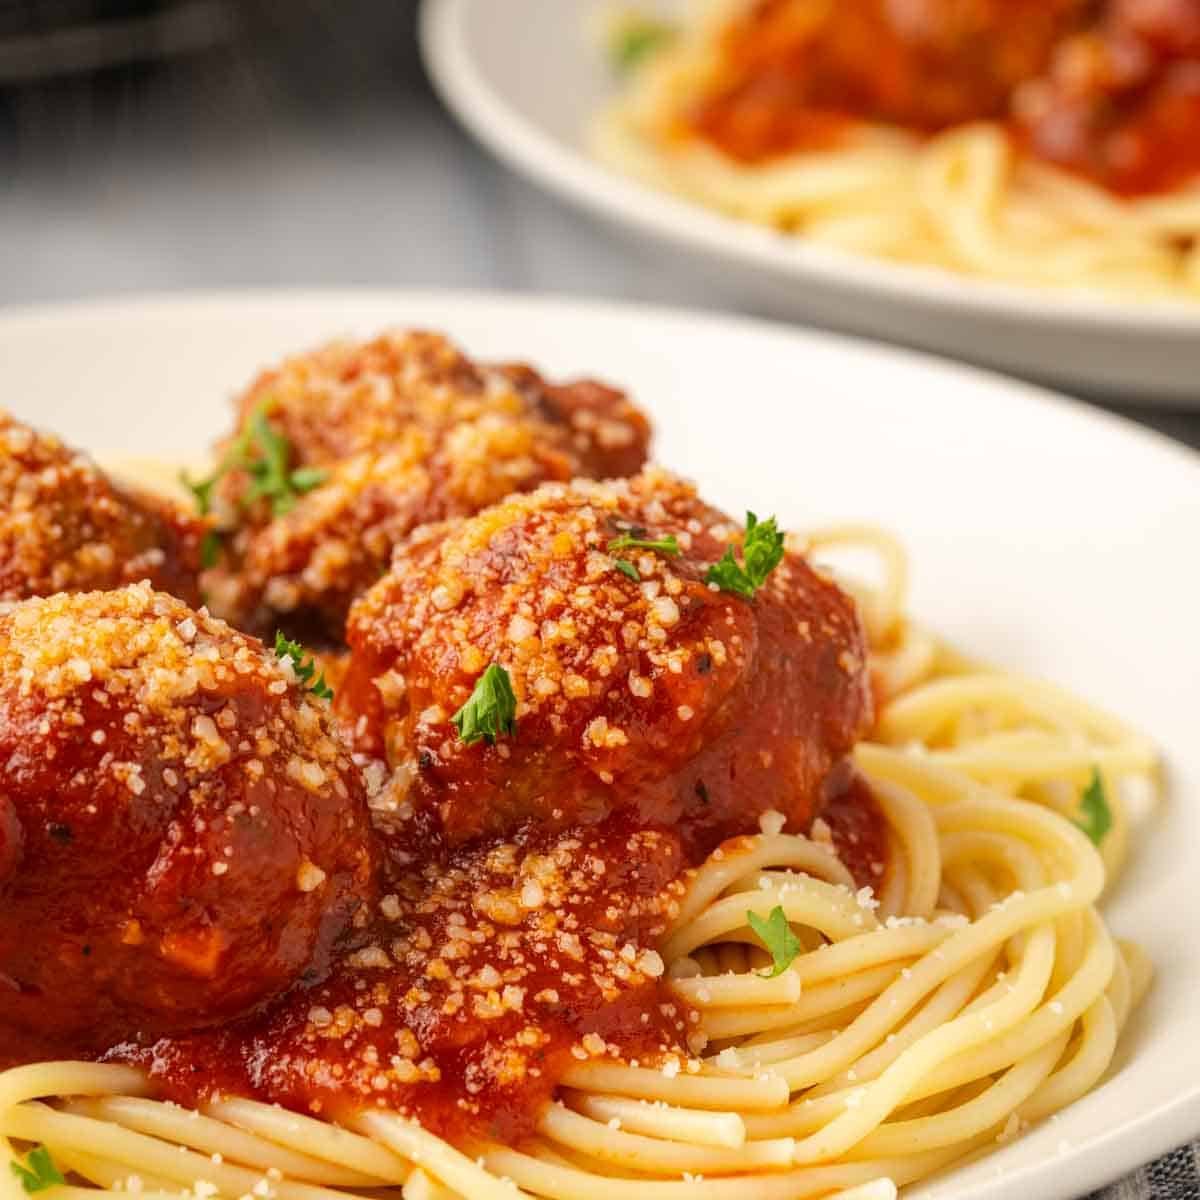 plated meatballs with spaghetti.